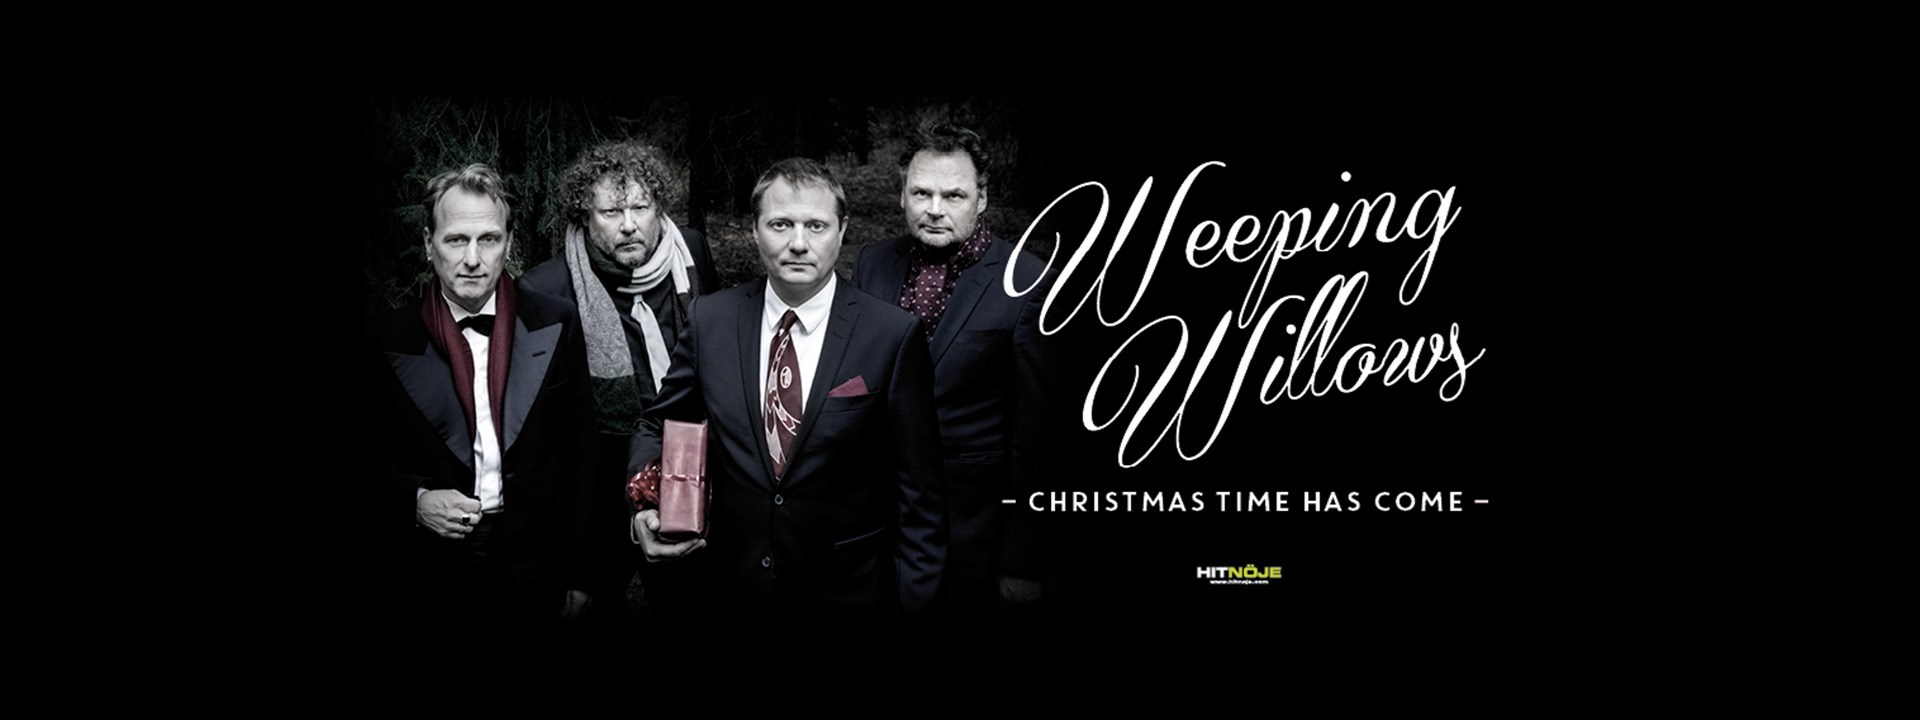 Weeping Willows - Christmas time has come